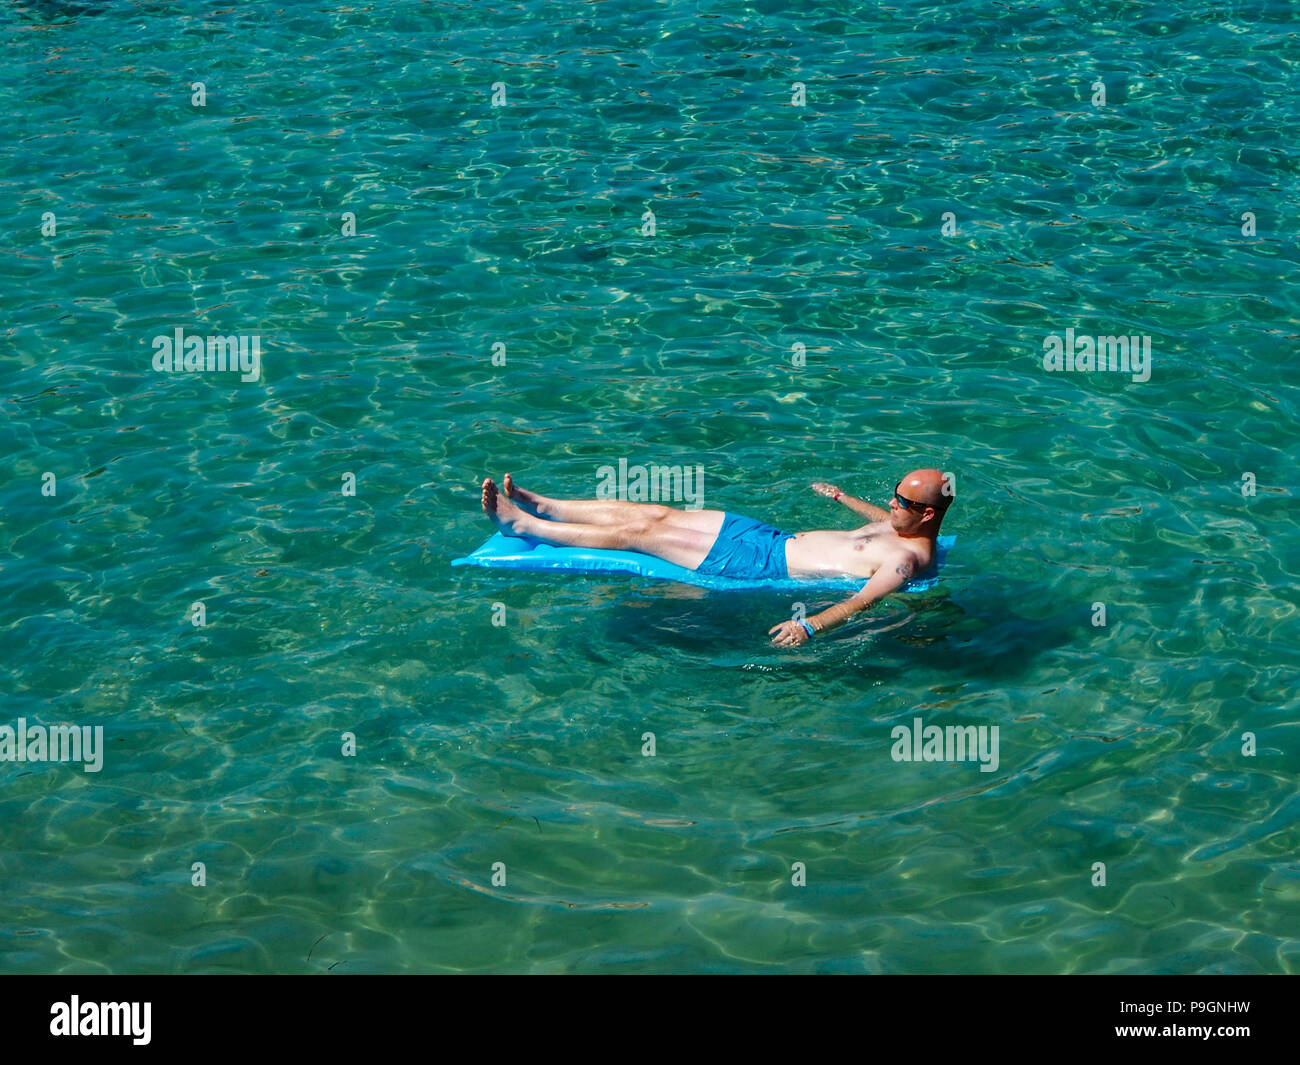 A man floats on an inflatable in a crystal clear sea Stock Photo